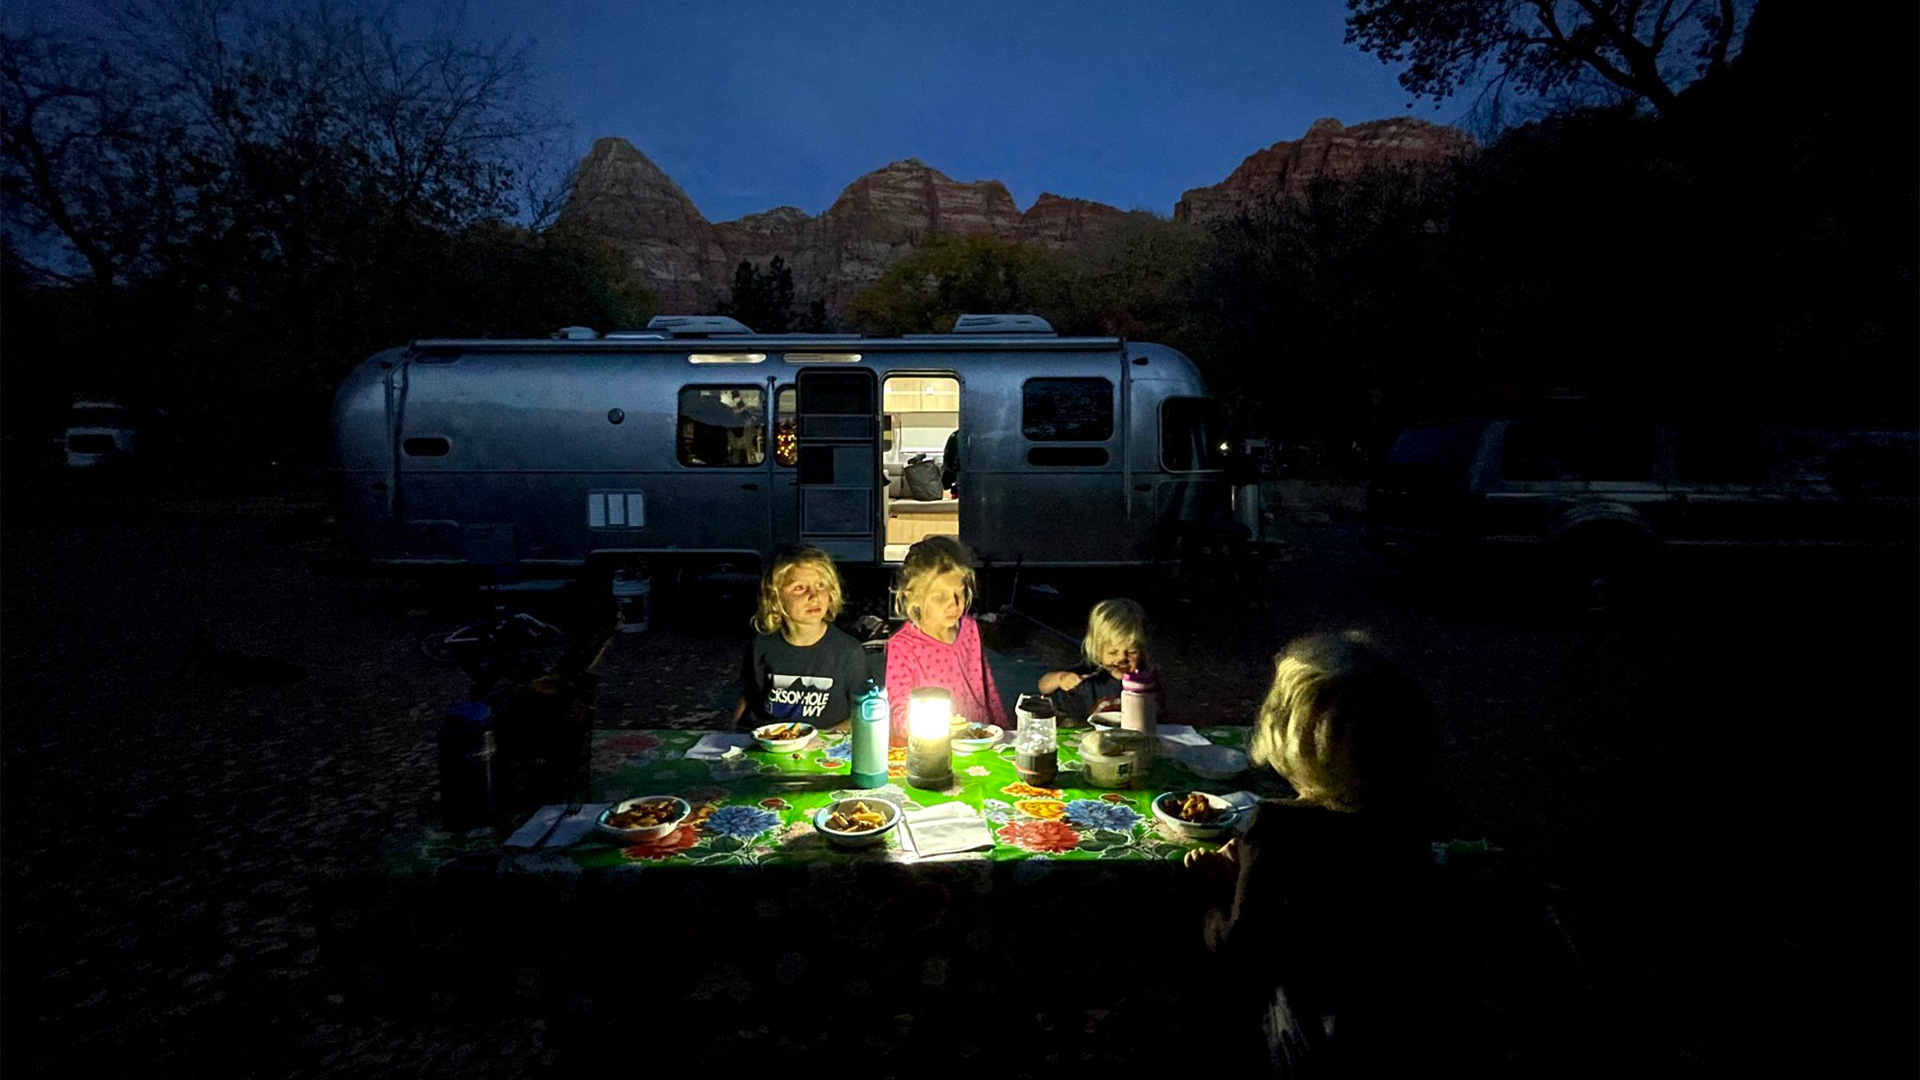 Four kids sitting around a campfire while they camp in their Airstream travel trailer.